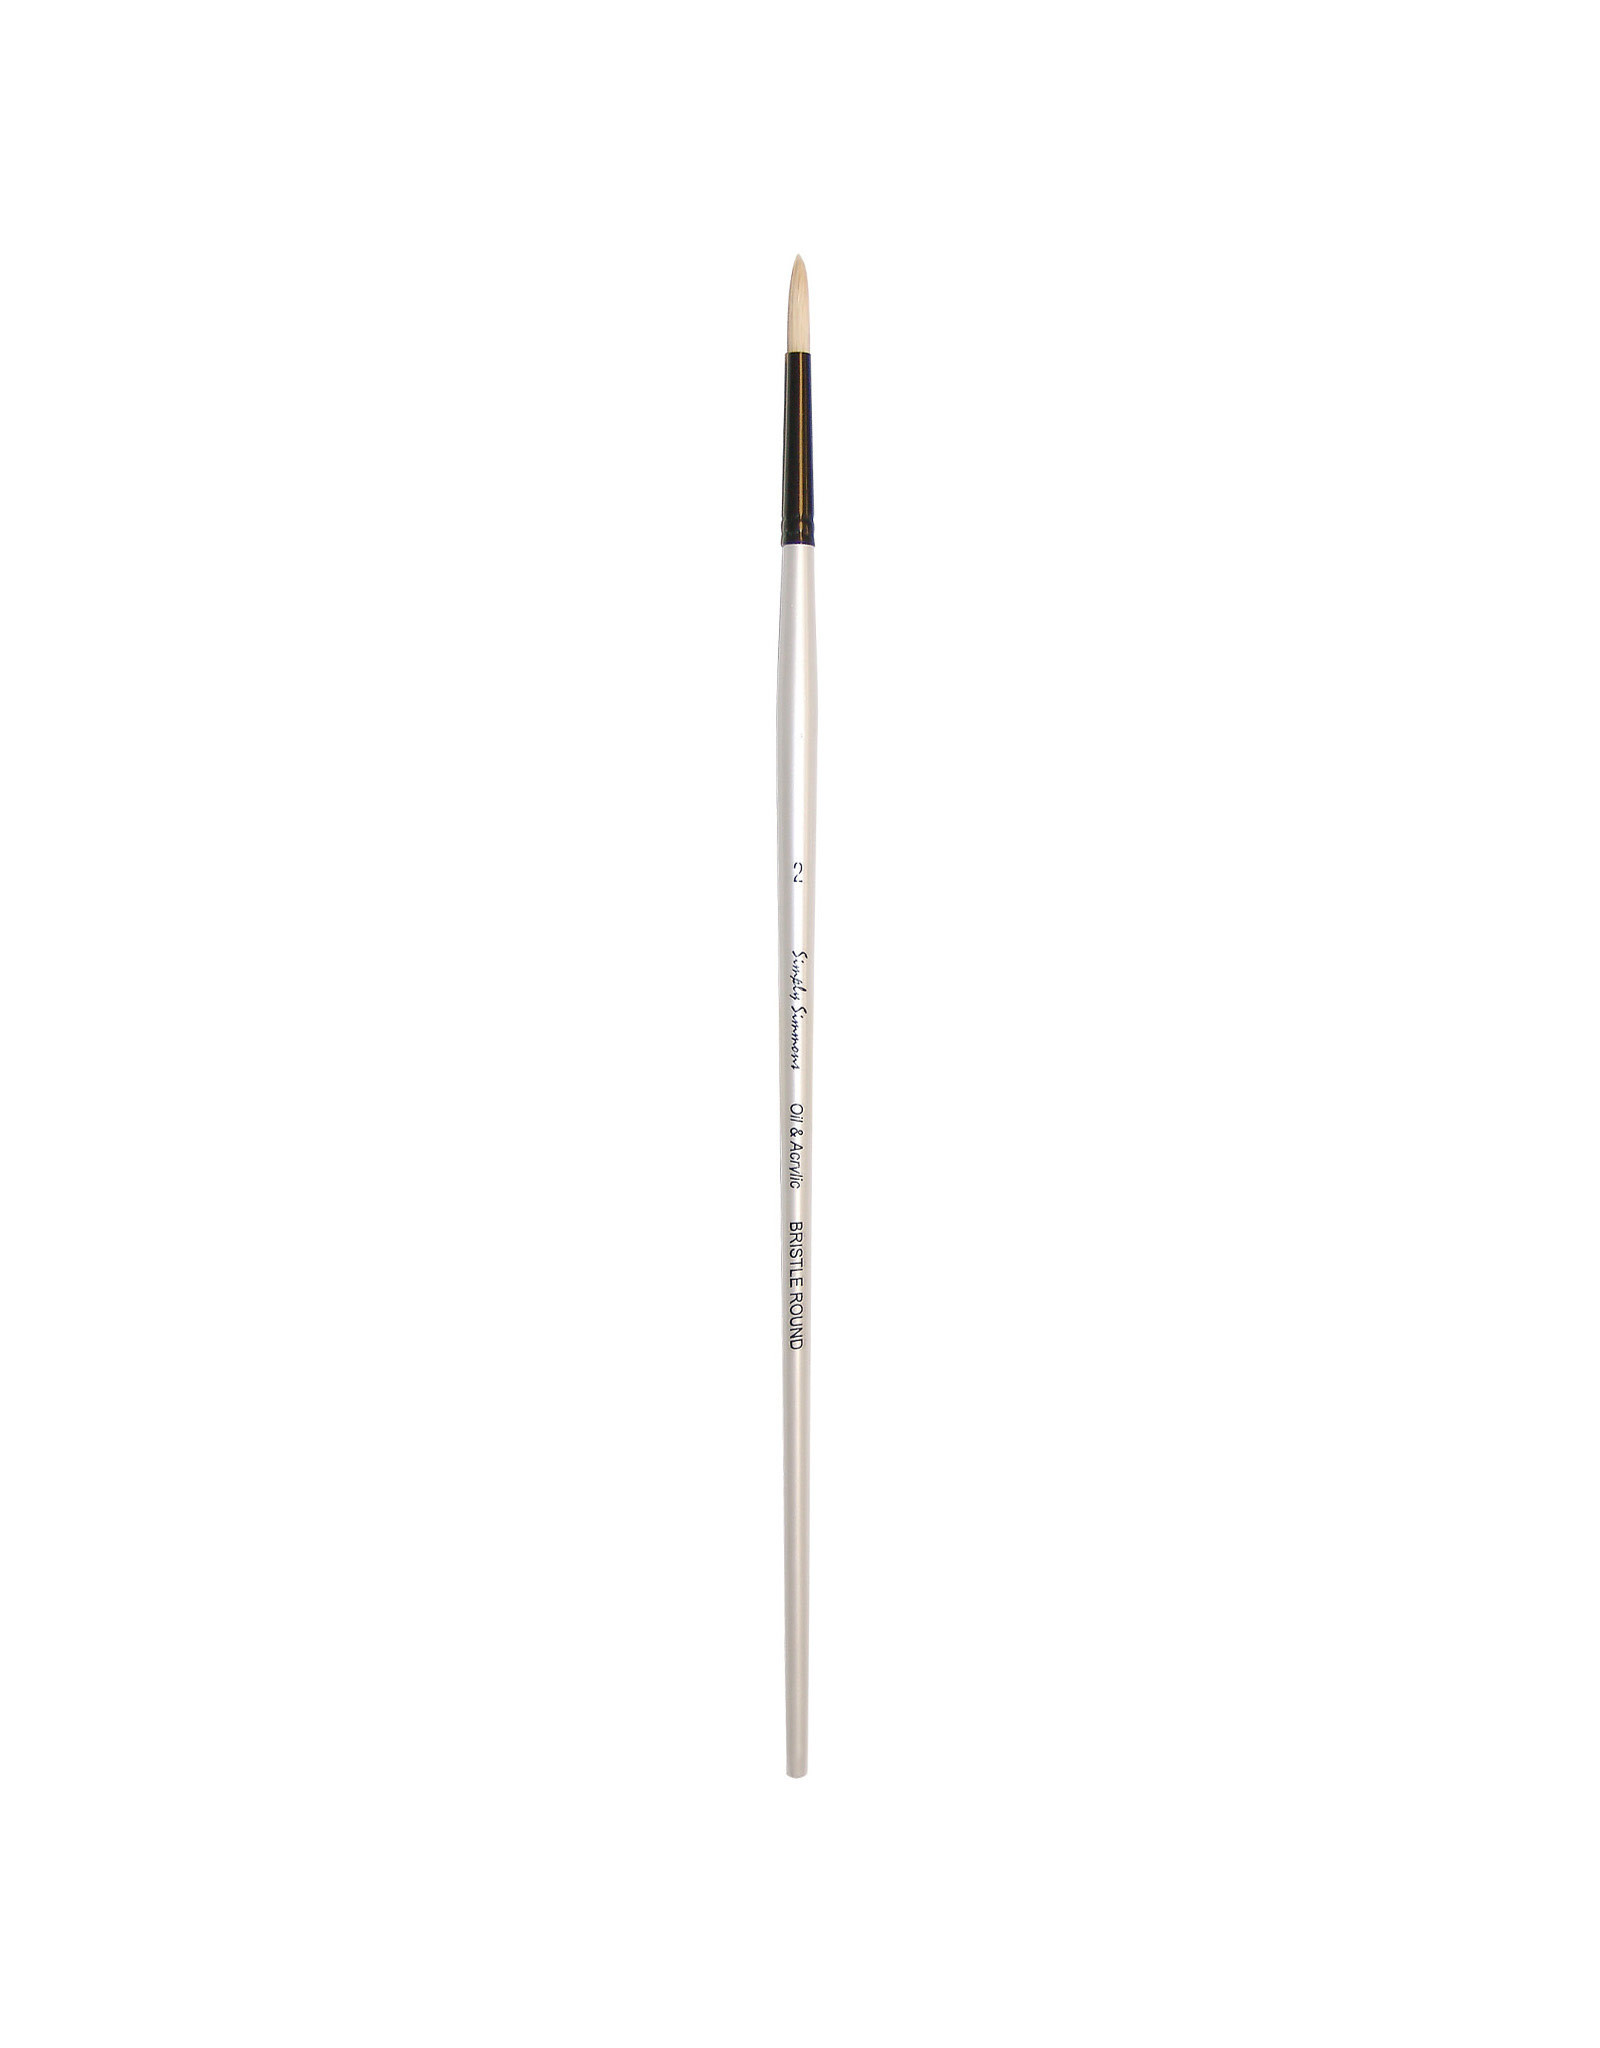 Daler-Rowney Simply Simmons Long Handle Bristle Round # 2